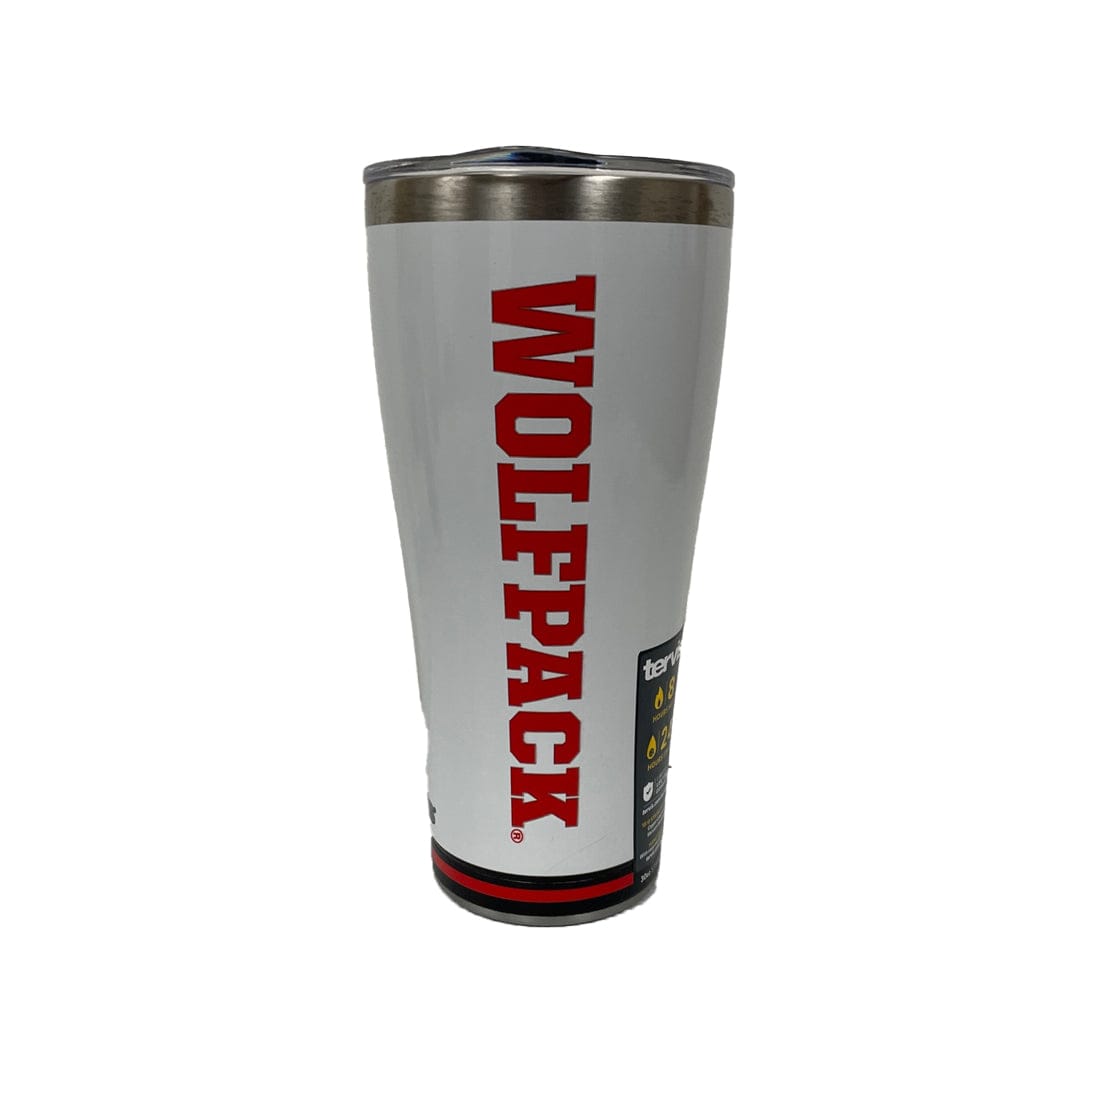 Tervis Tumbler Tervis Stainless Steel 30 oz NC State Wolfpack Arctic Tumbler with Slider Lid